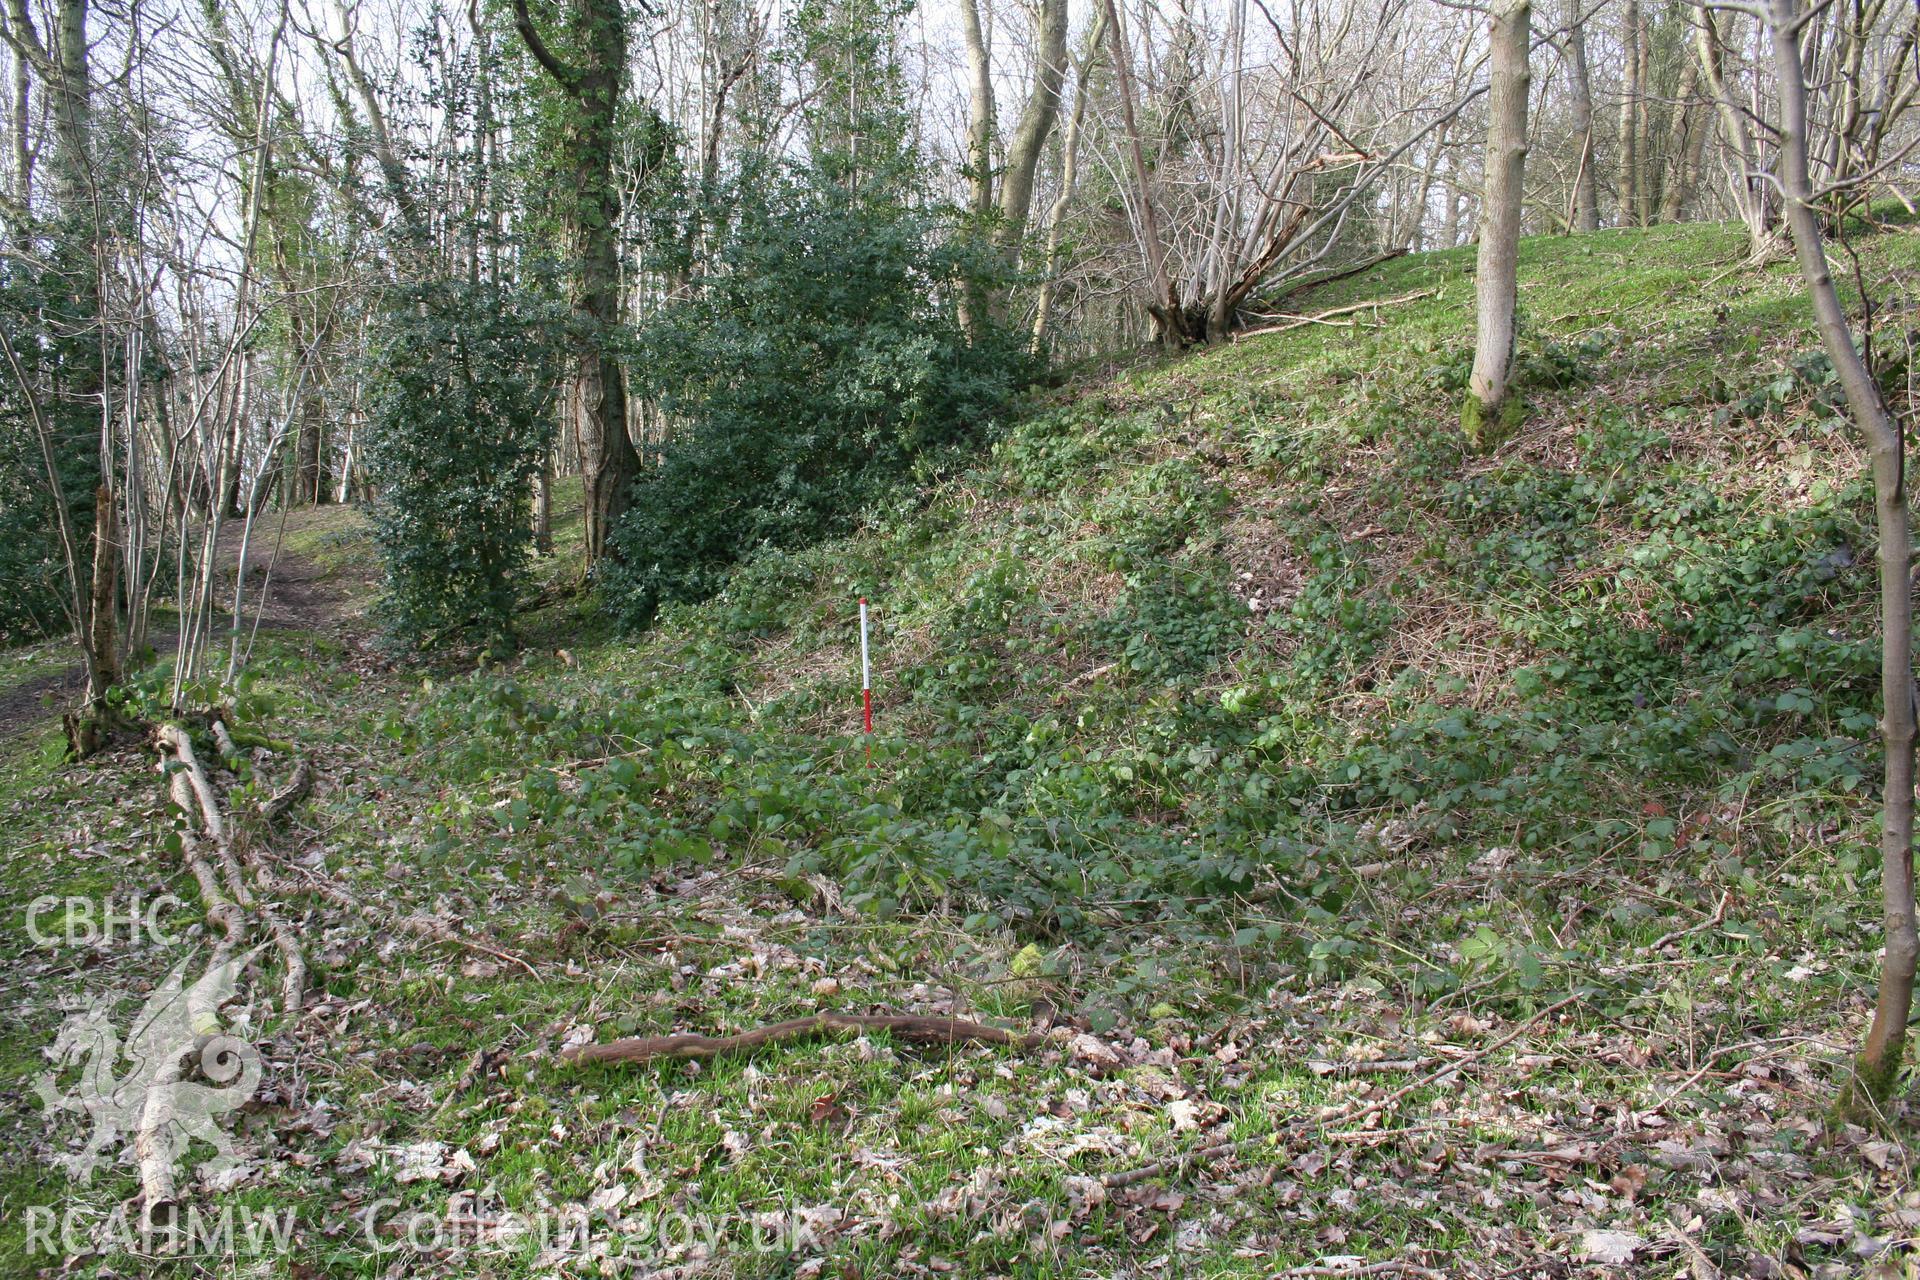 Gaer Fawr Hillfort. Bank and ditch defining the annexe to the south of the fort, from the east (with scale).